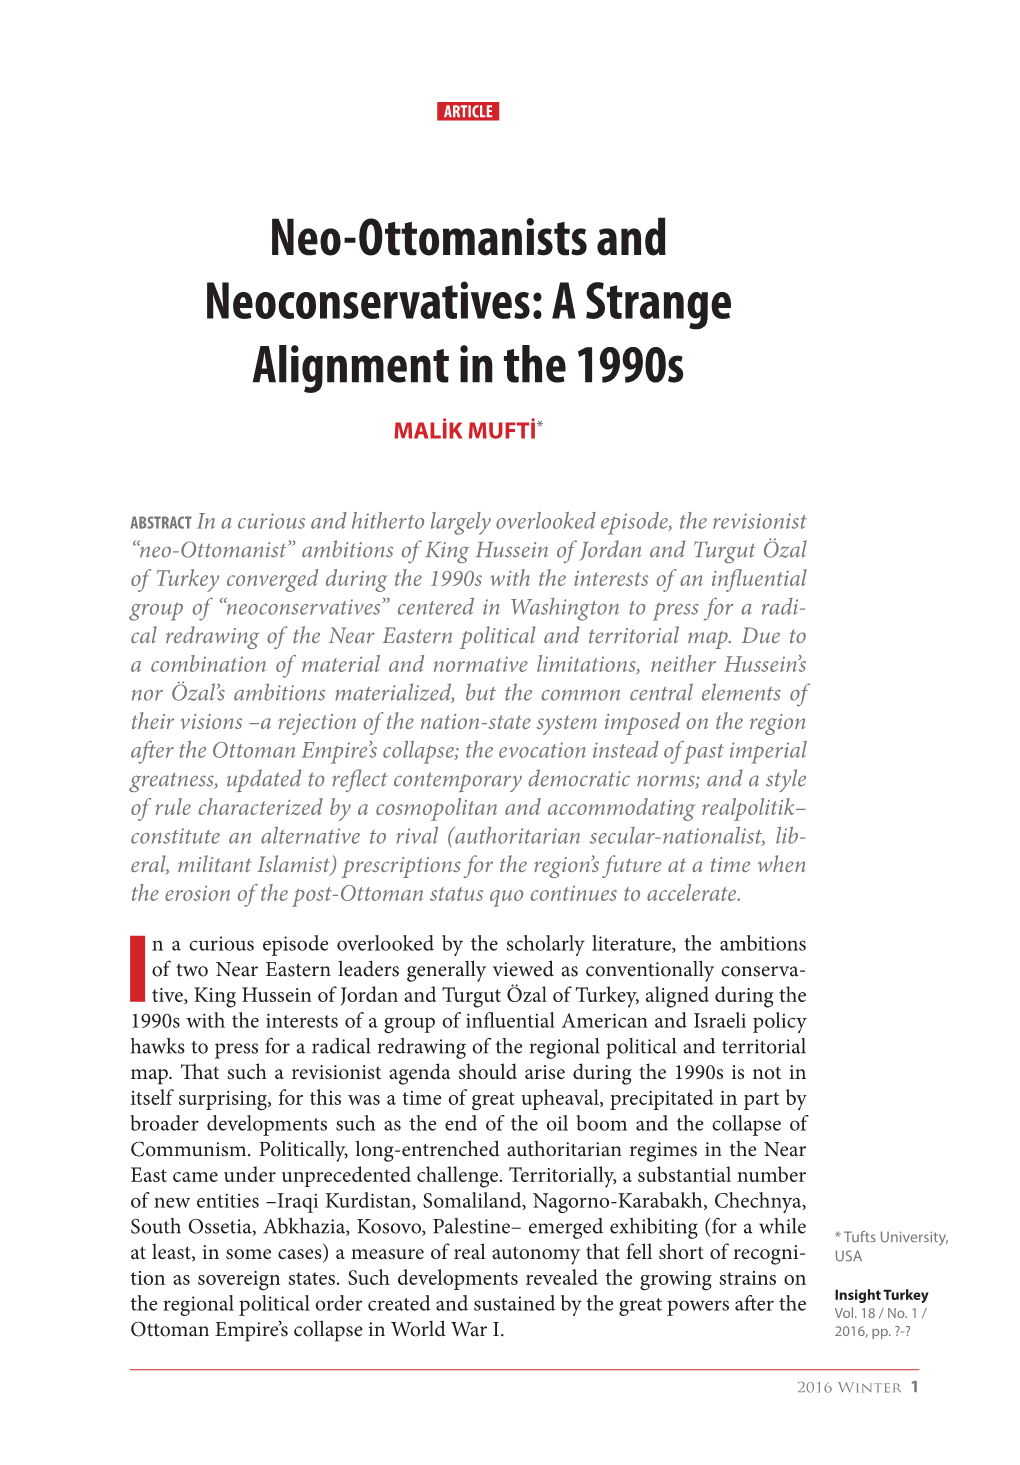 Neo-Ottomanists and Neoconservatives: a Strange Alignment in the 1990S